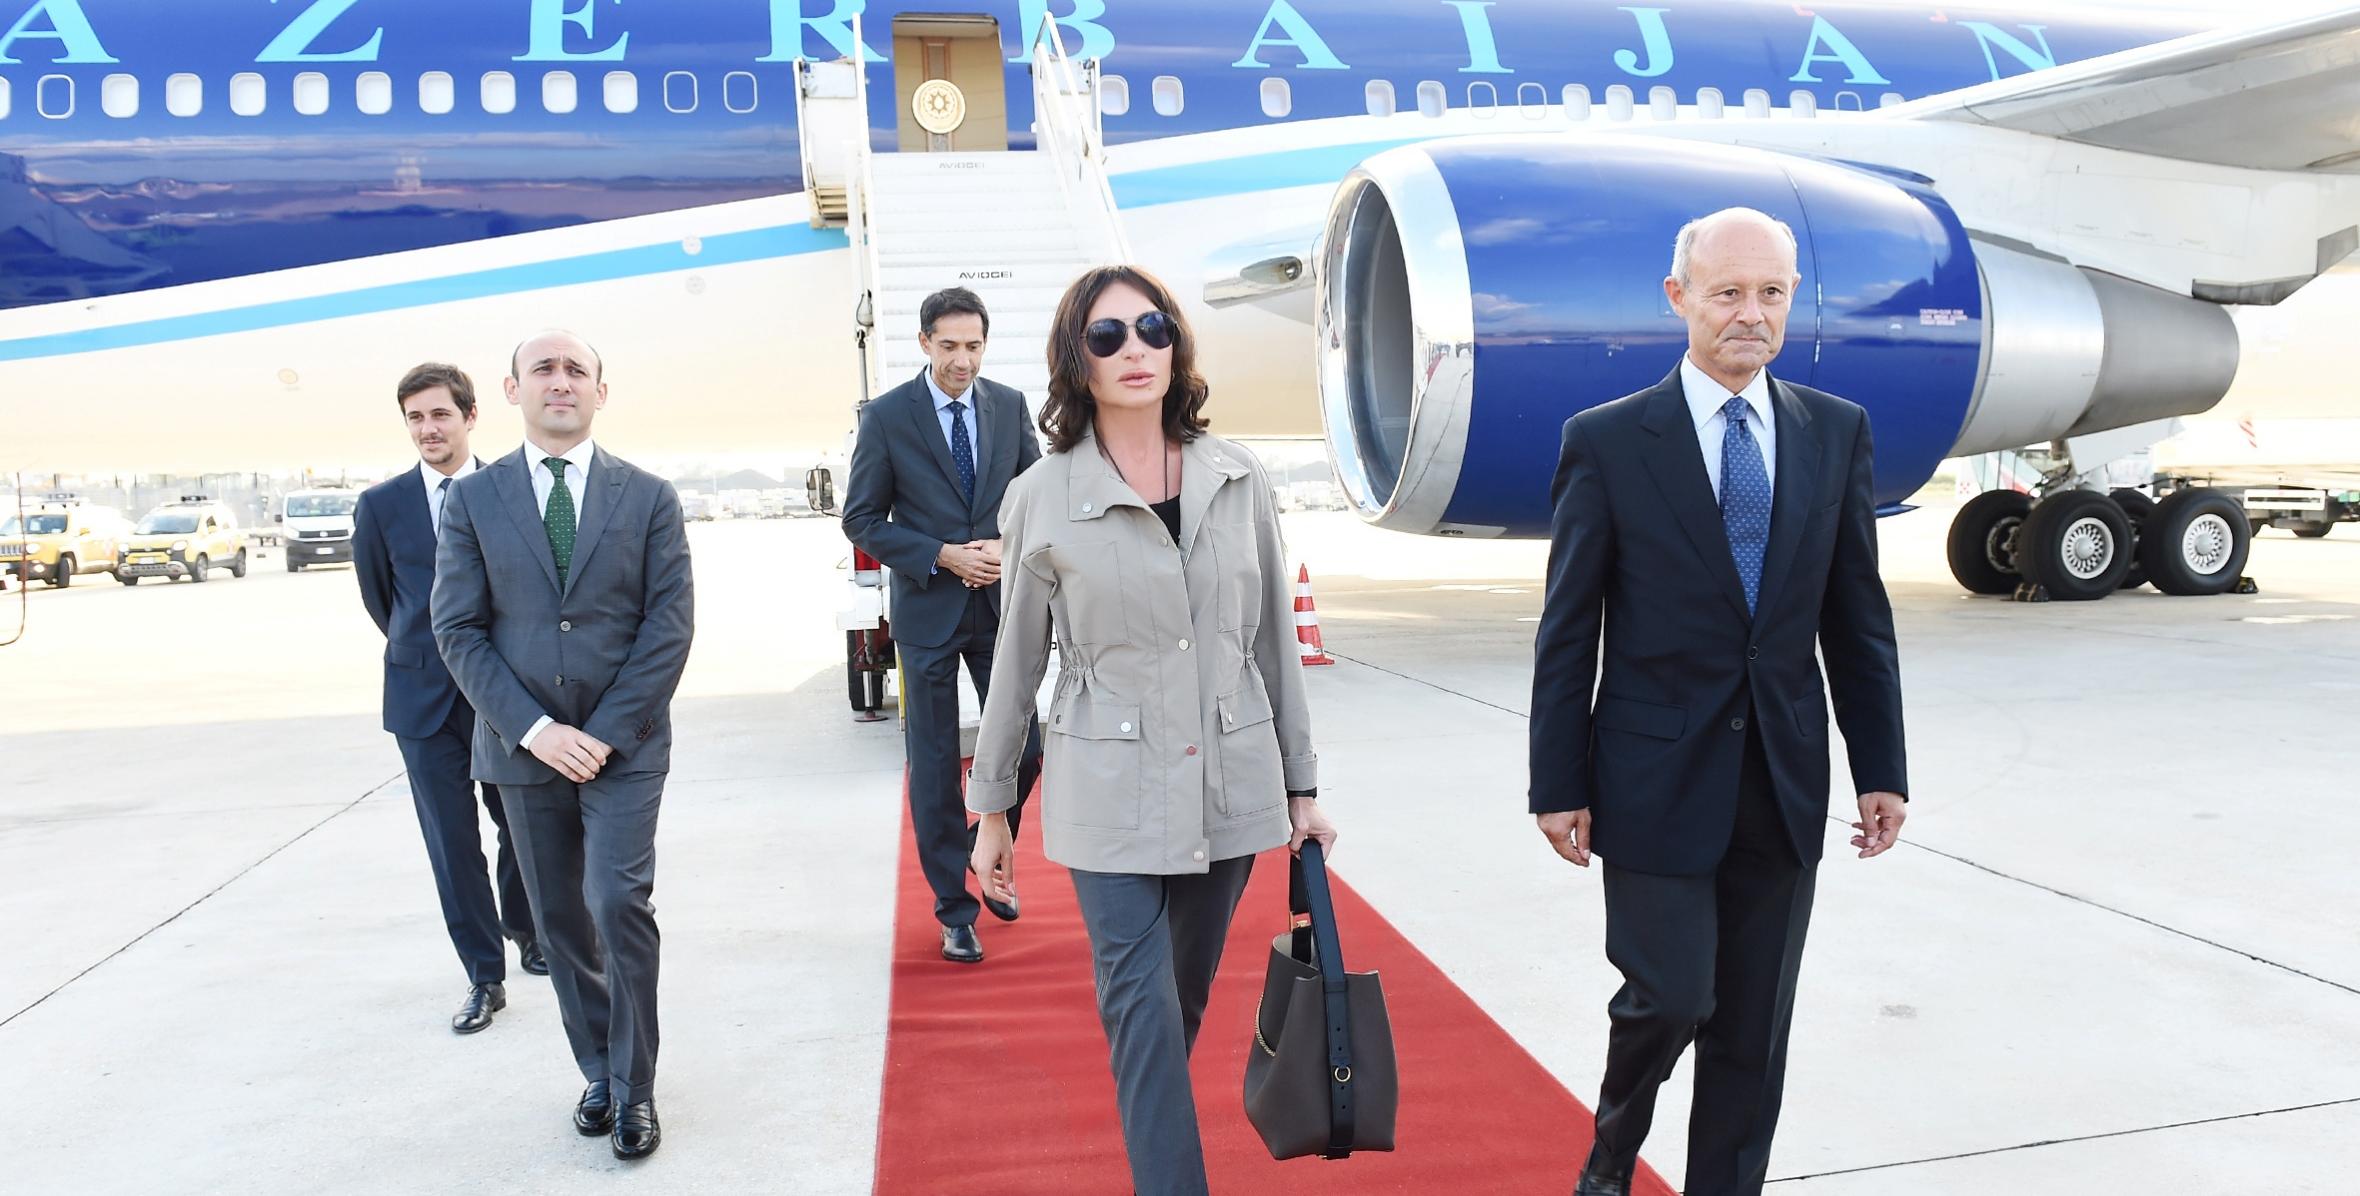 First Vice-President of Azerbaijan Mehriban Aliyeva arrived in Italy for official visit